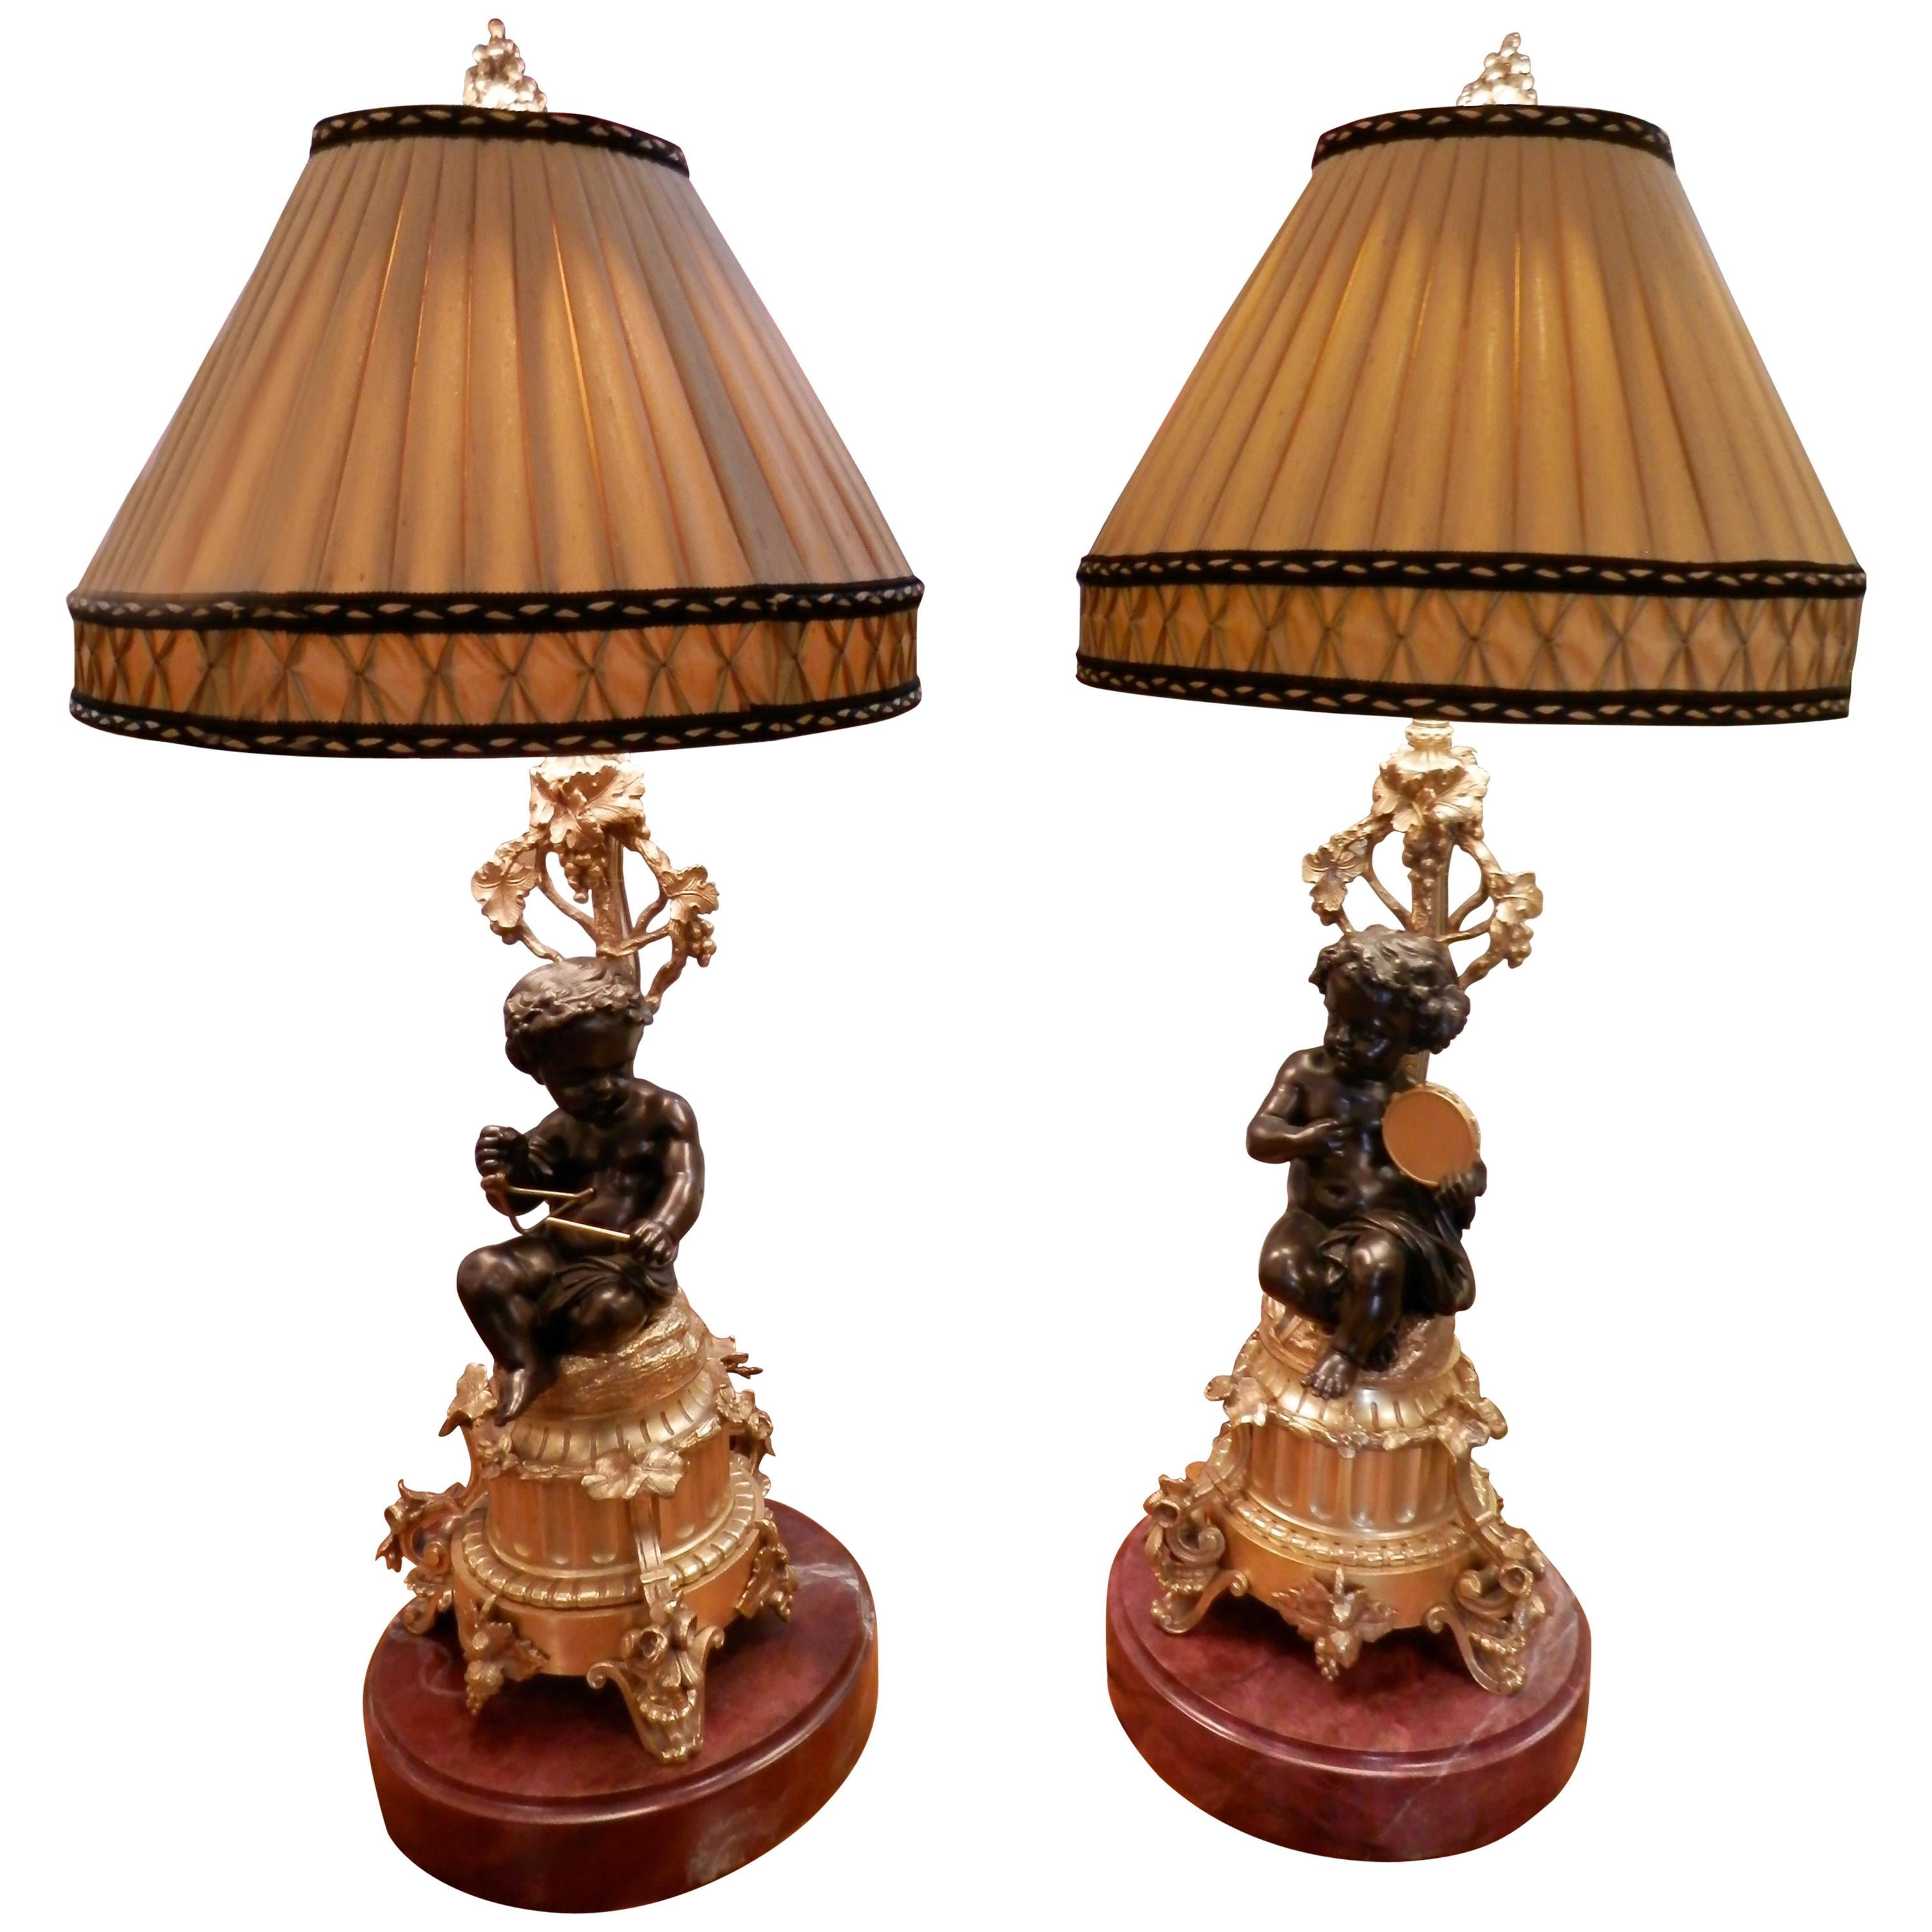 Pair of French 19th Century Patinated and Gilt Bronze Cherub Lamps